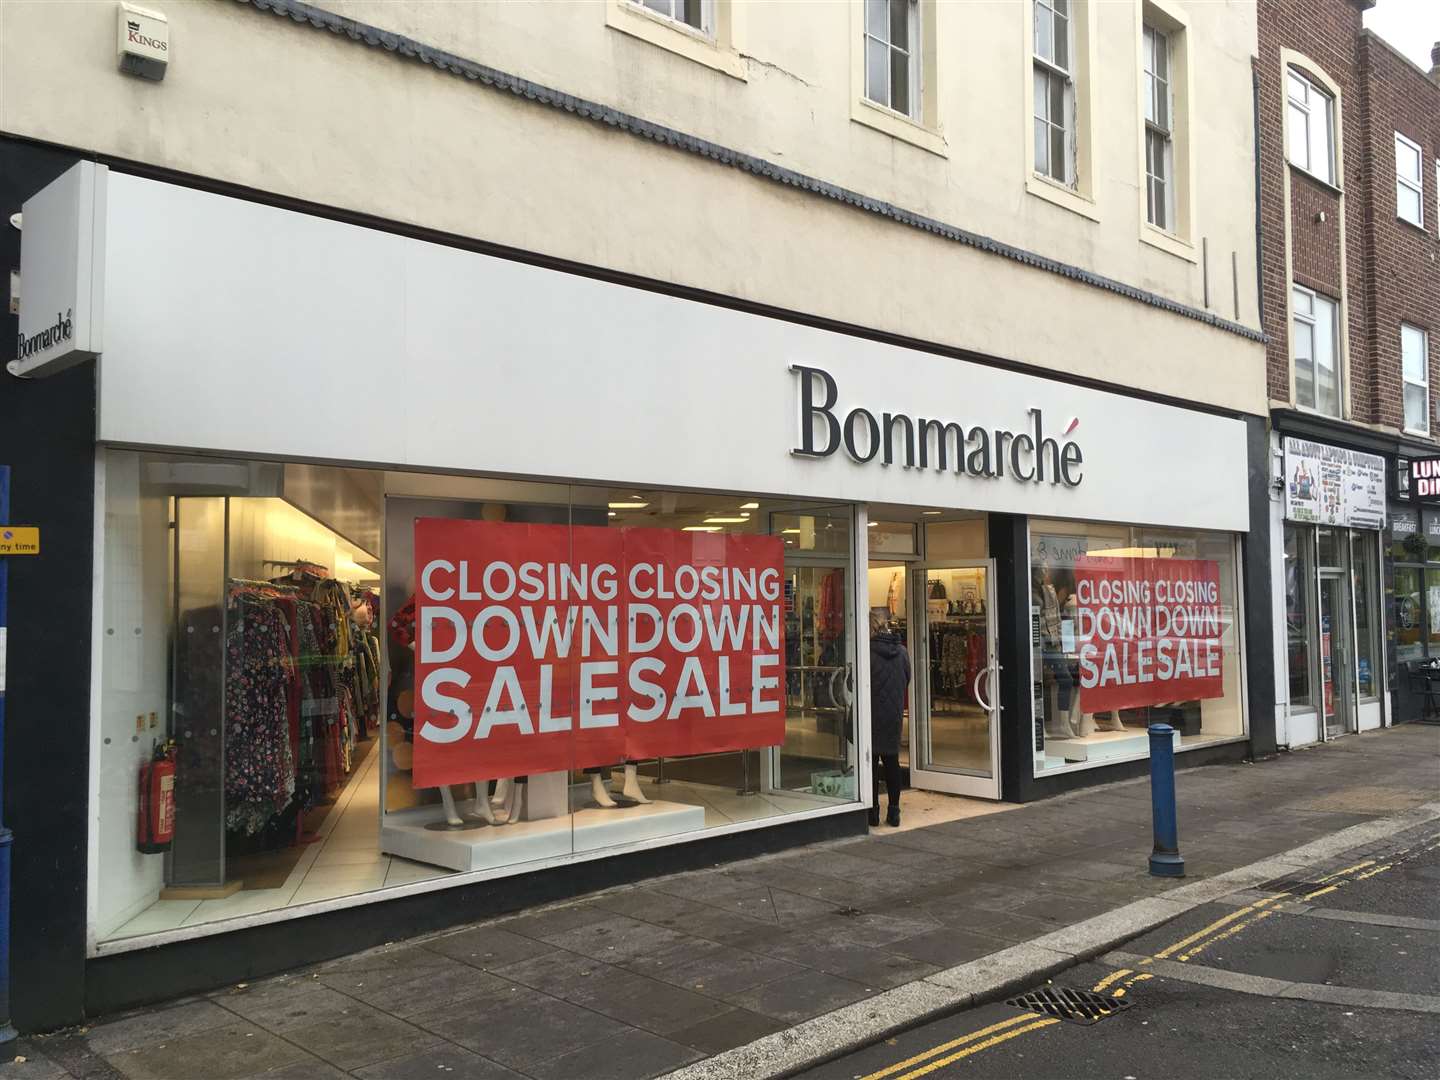 High street stores have been threatened with closure